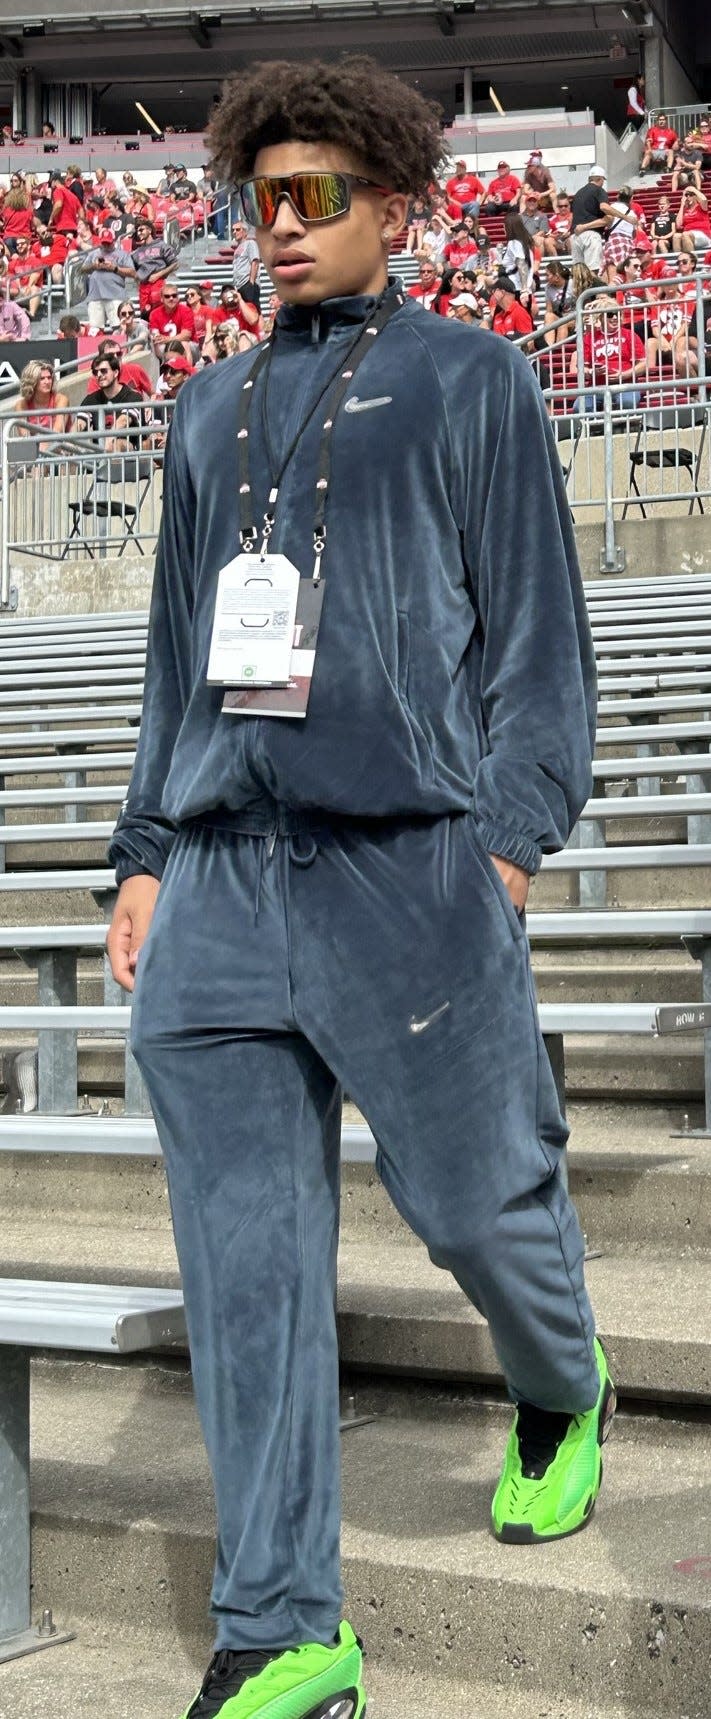 John "Juni" Mobley Jr., an Ohio State commitment in the class of 2024, arrives at Ohio Stadium on his official visit on Sept. 9, 2023.